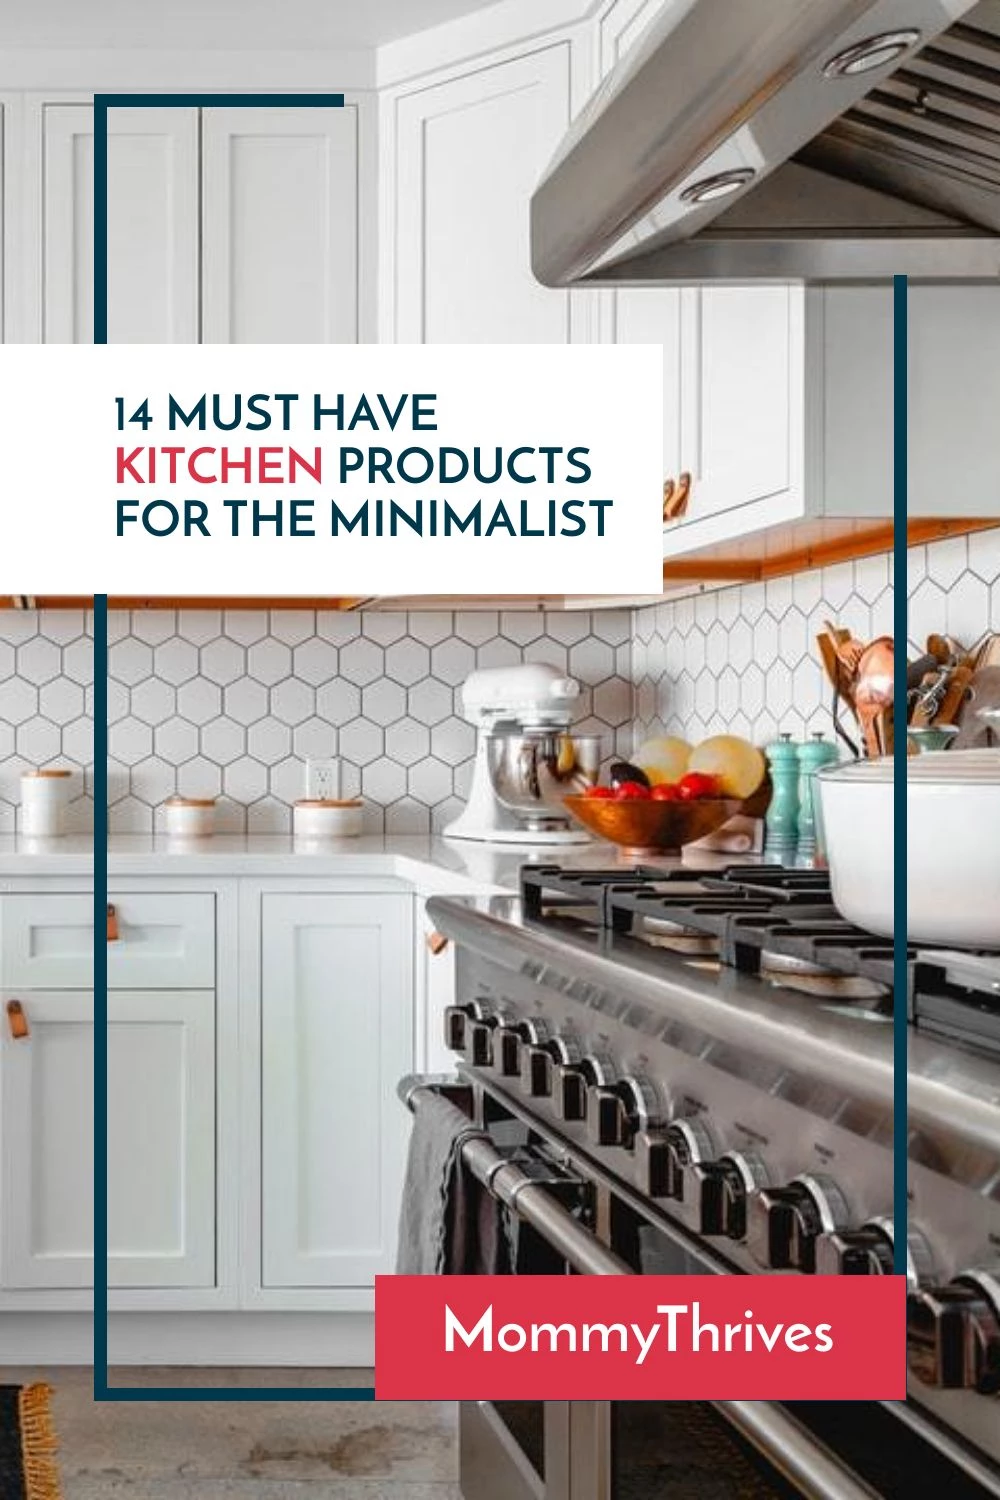 thinKitchen Bestsellers: The Must-Have Products for Your Kitchen